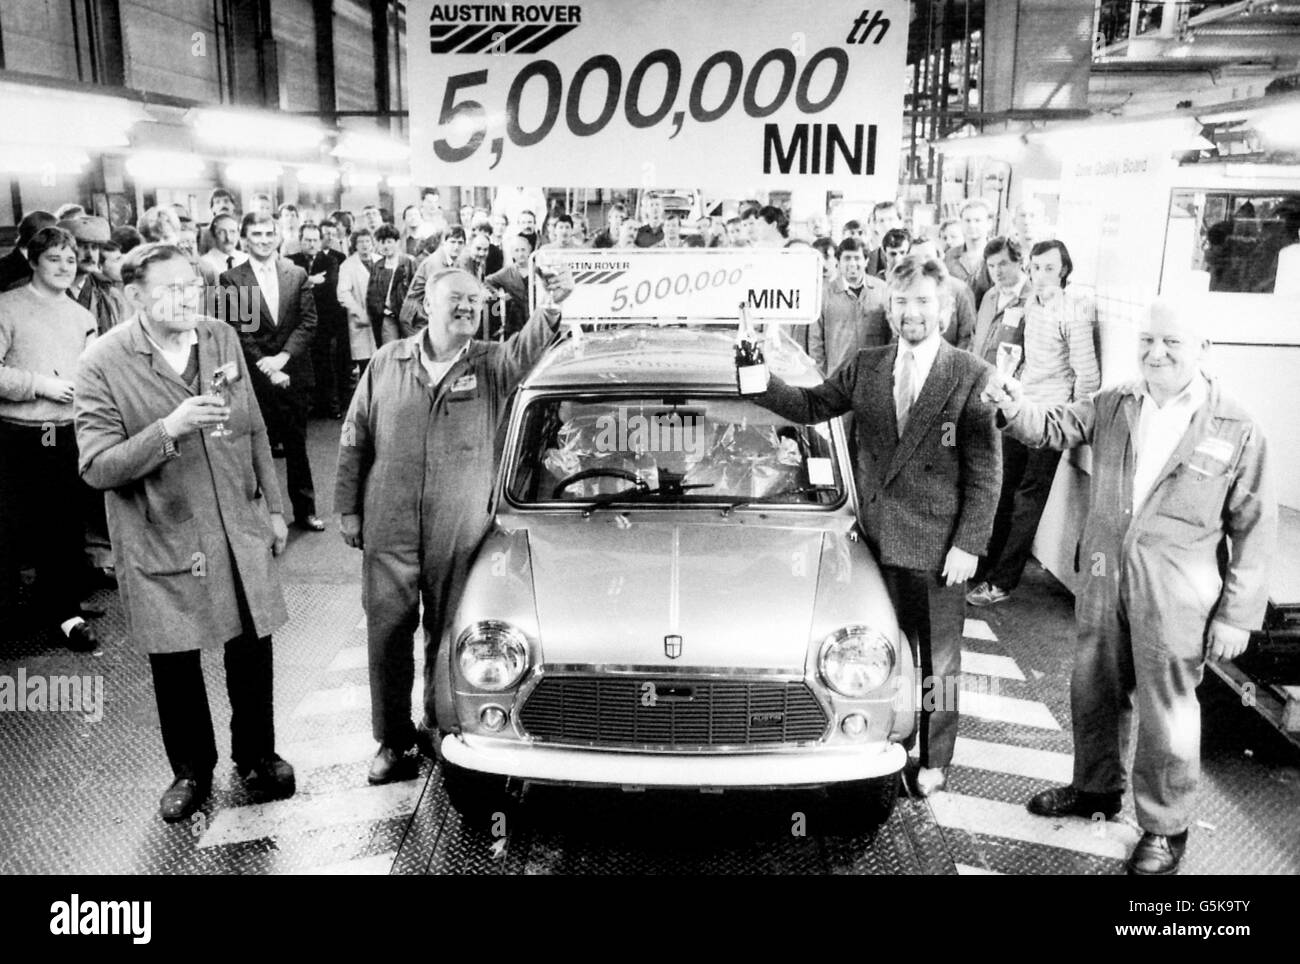 Television star Noel Edmonds joins Austin Rover workers for a champagne celebration to toast a new star - the 5,000,000th mini car to roll off the Longbridge production line. Mr Edmonds is chairman of the Stars Organisation for Spastics, to whom the car is donated. Stock Photo